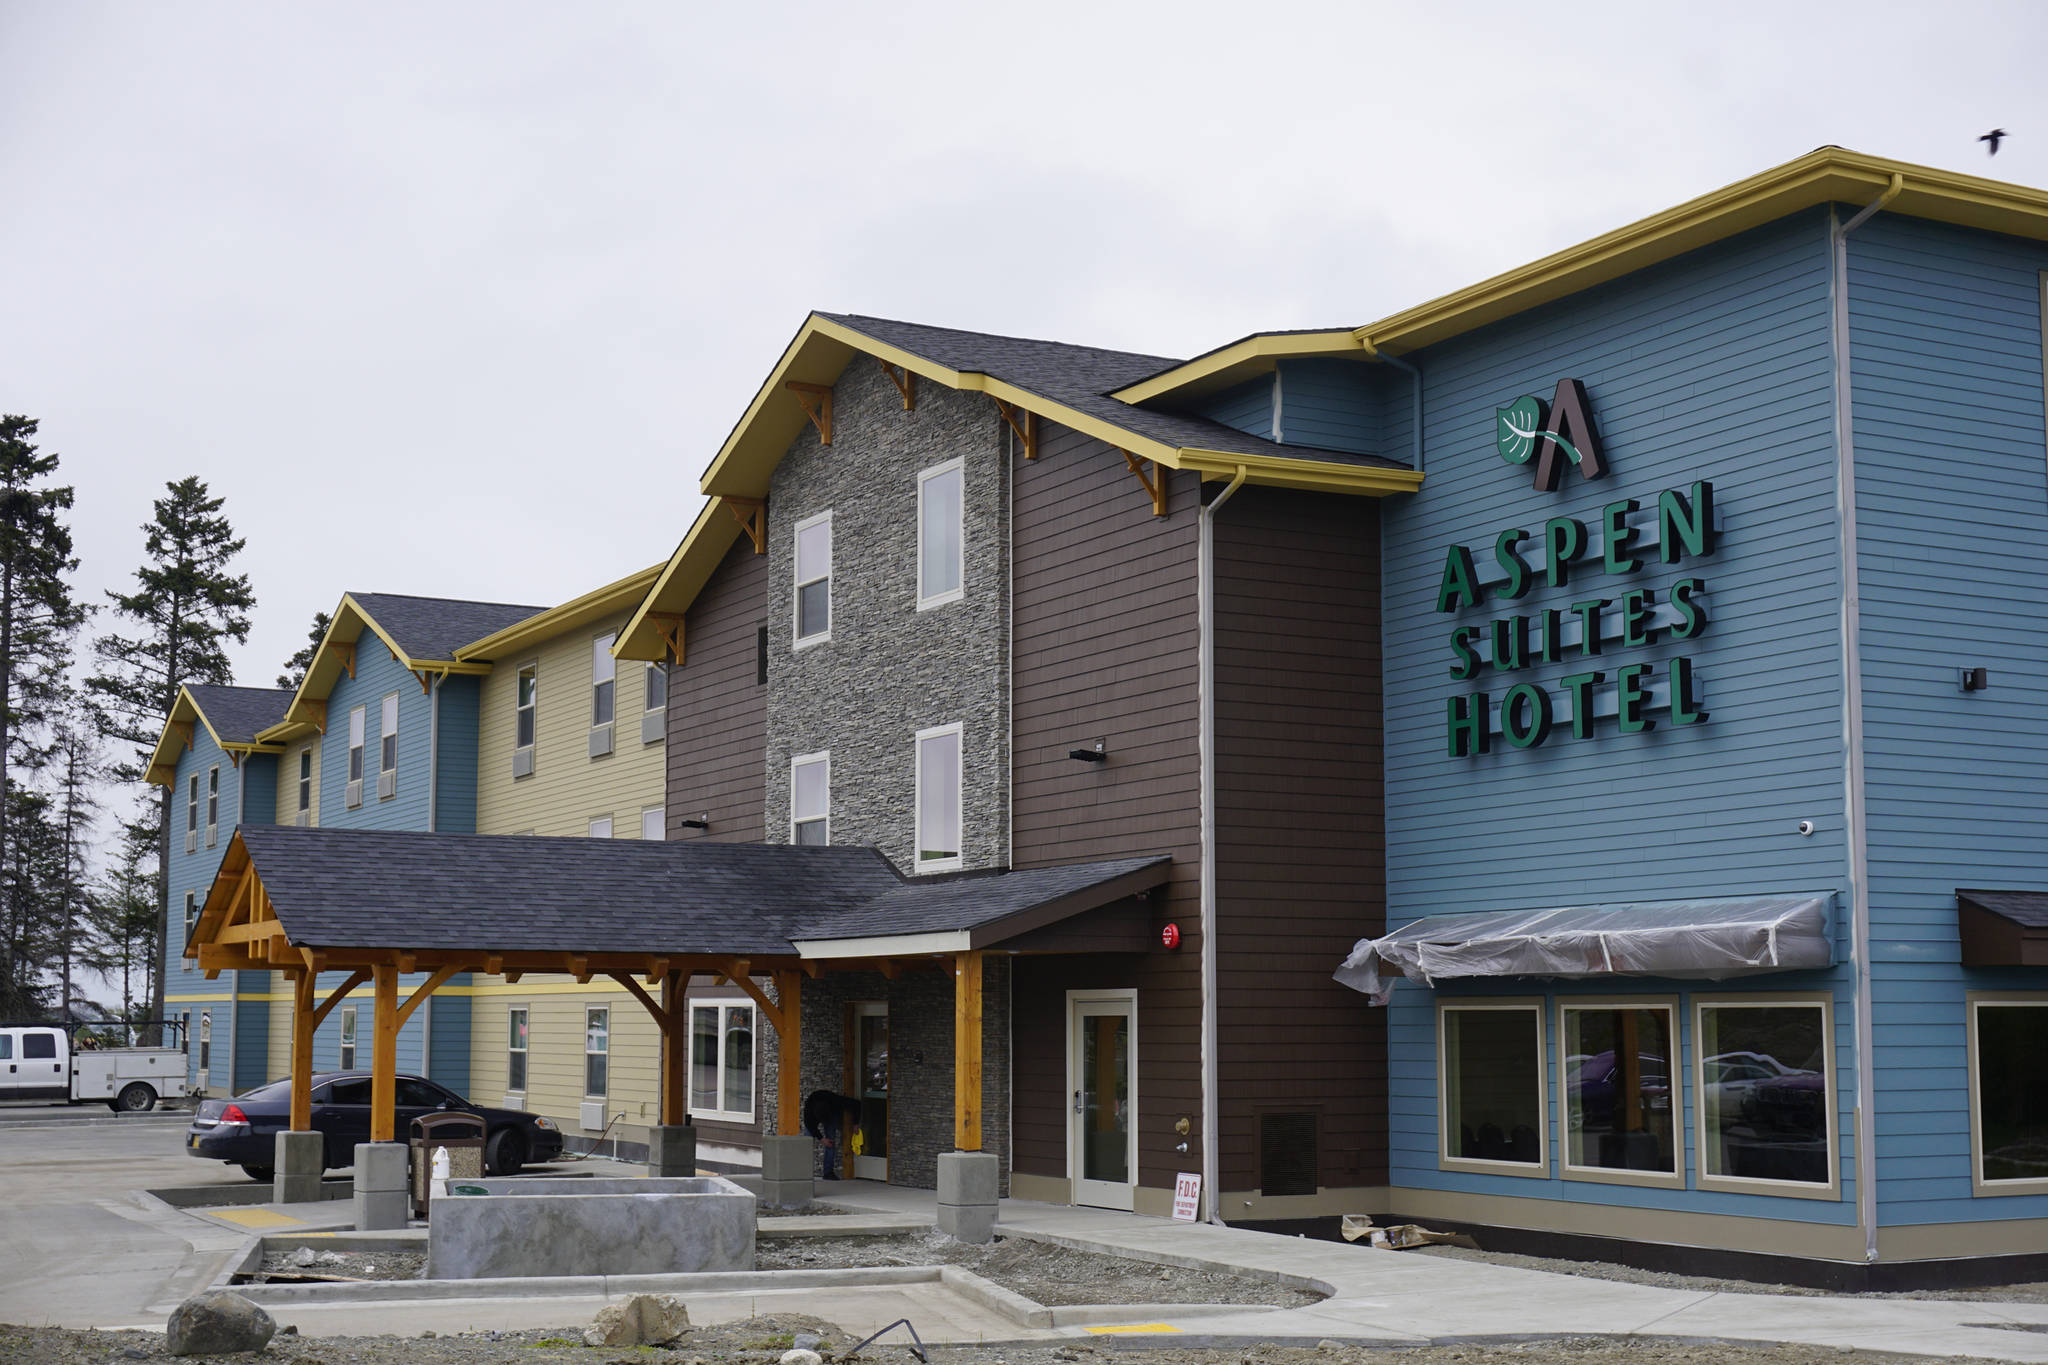 Workers finish up the new Homer Aspen Suites Hotel on May 21, 2019, in Homer, Alaska. (Photo by Michael Armstrong/Homer News)